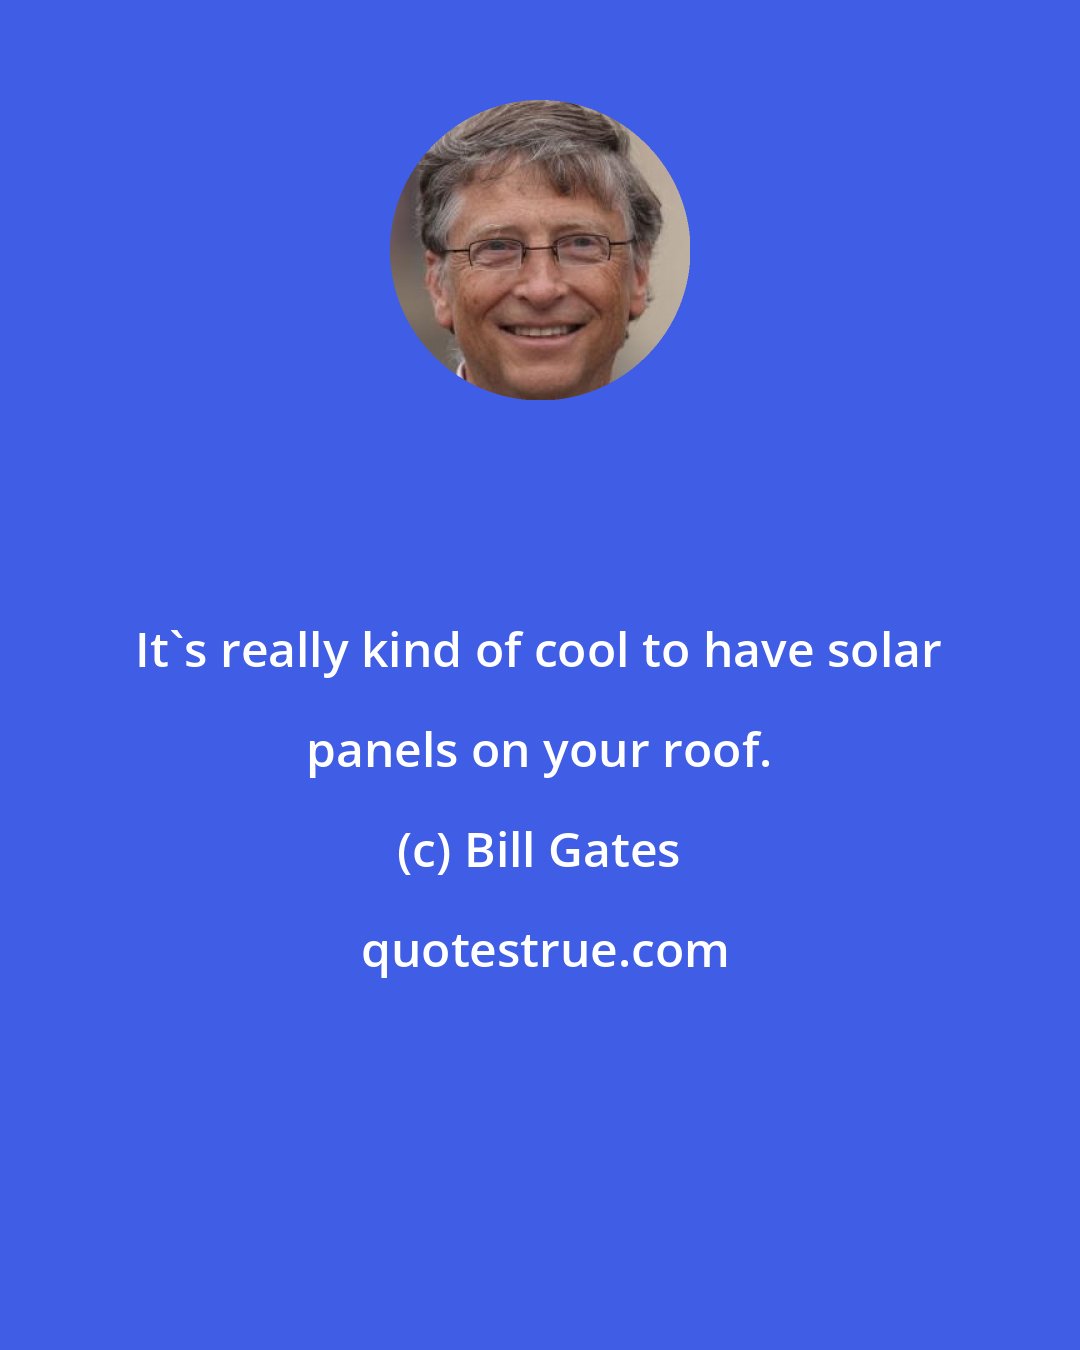 Bill Gates: It's really kind of cool to have solar panels on your roof.